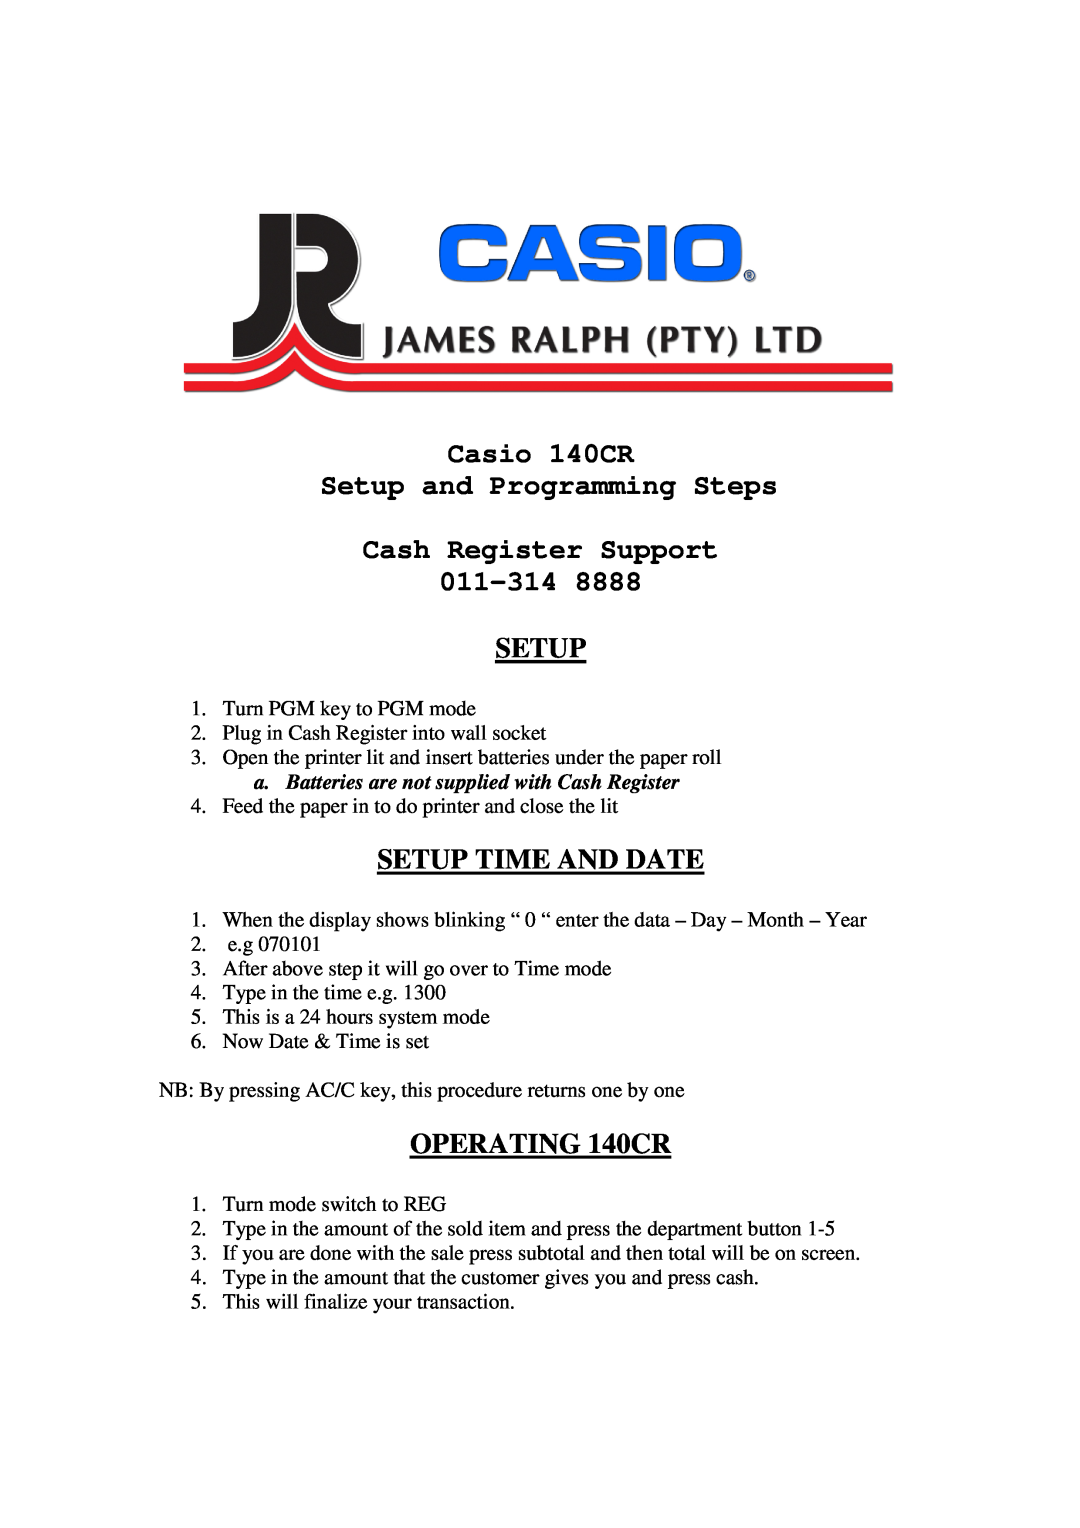 Casio manual Setup Time And Date, OPERATING 140CR 